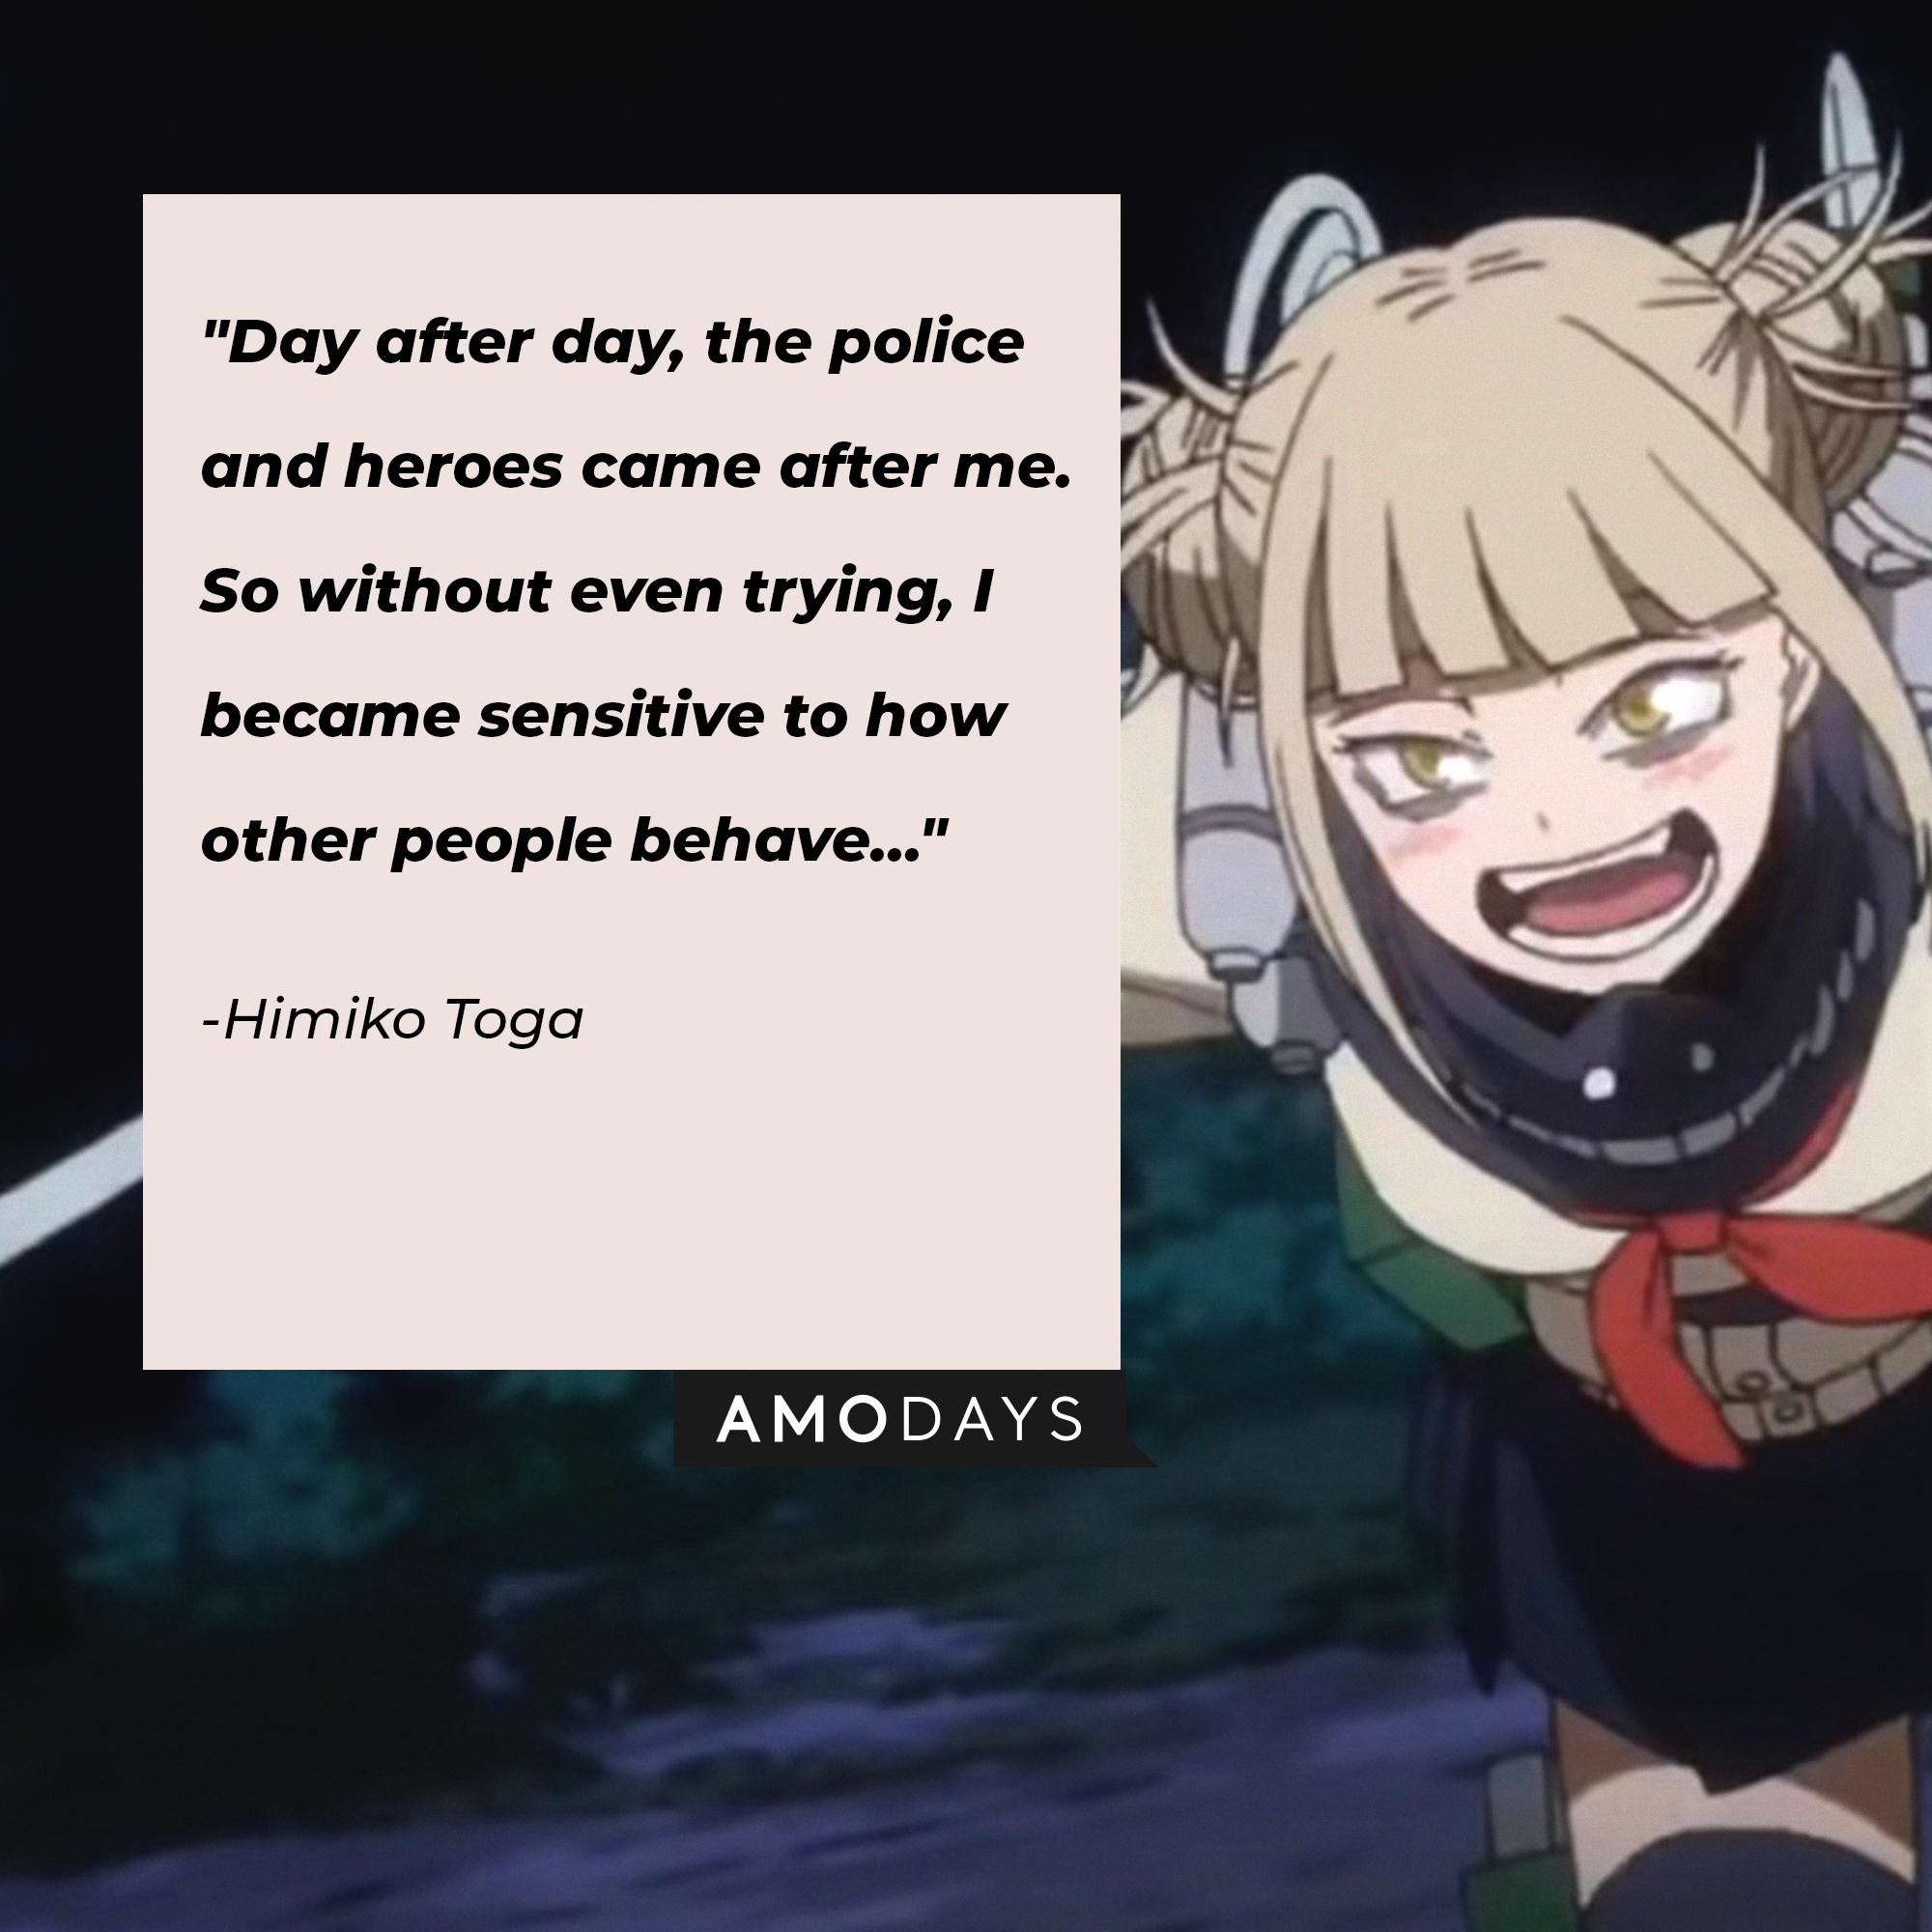 Himiko Toga’s quote: "Day after day, the police and heroes came after me. So without even trying, I became sensitive to how other people behave…” | Image: AmoDays